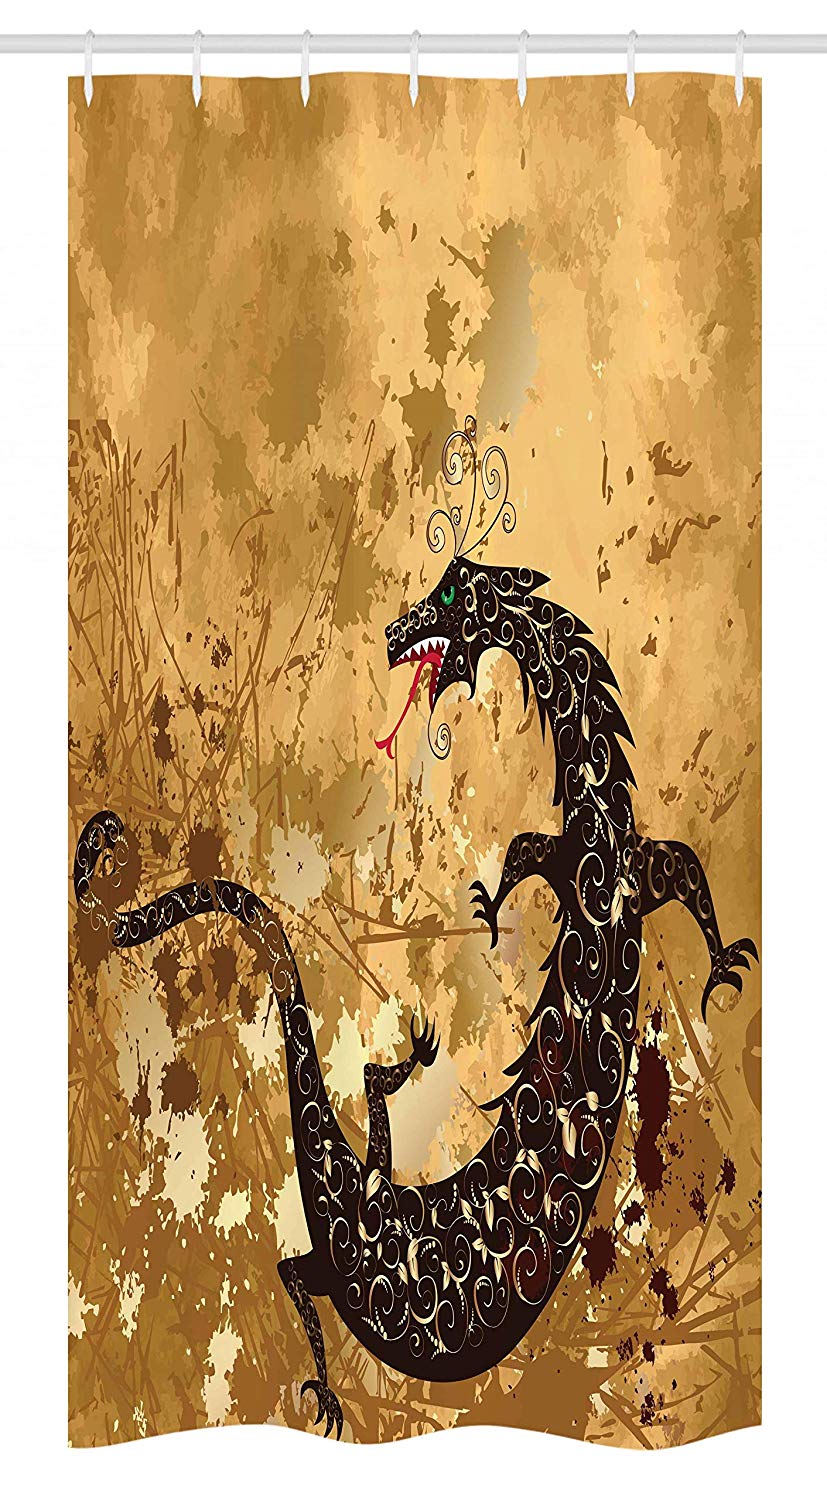 Ambesonne Dragon Stall Shower Curtain, Reptile Dragon Grunge Floral Ornate Ancient Asian Retro Image, Fabric Bathroom Decor Set with Hooks, 36 W x 72 L Inches, Sand Brown Light Caramel Brown